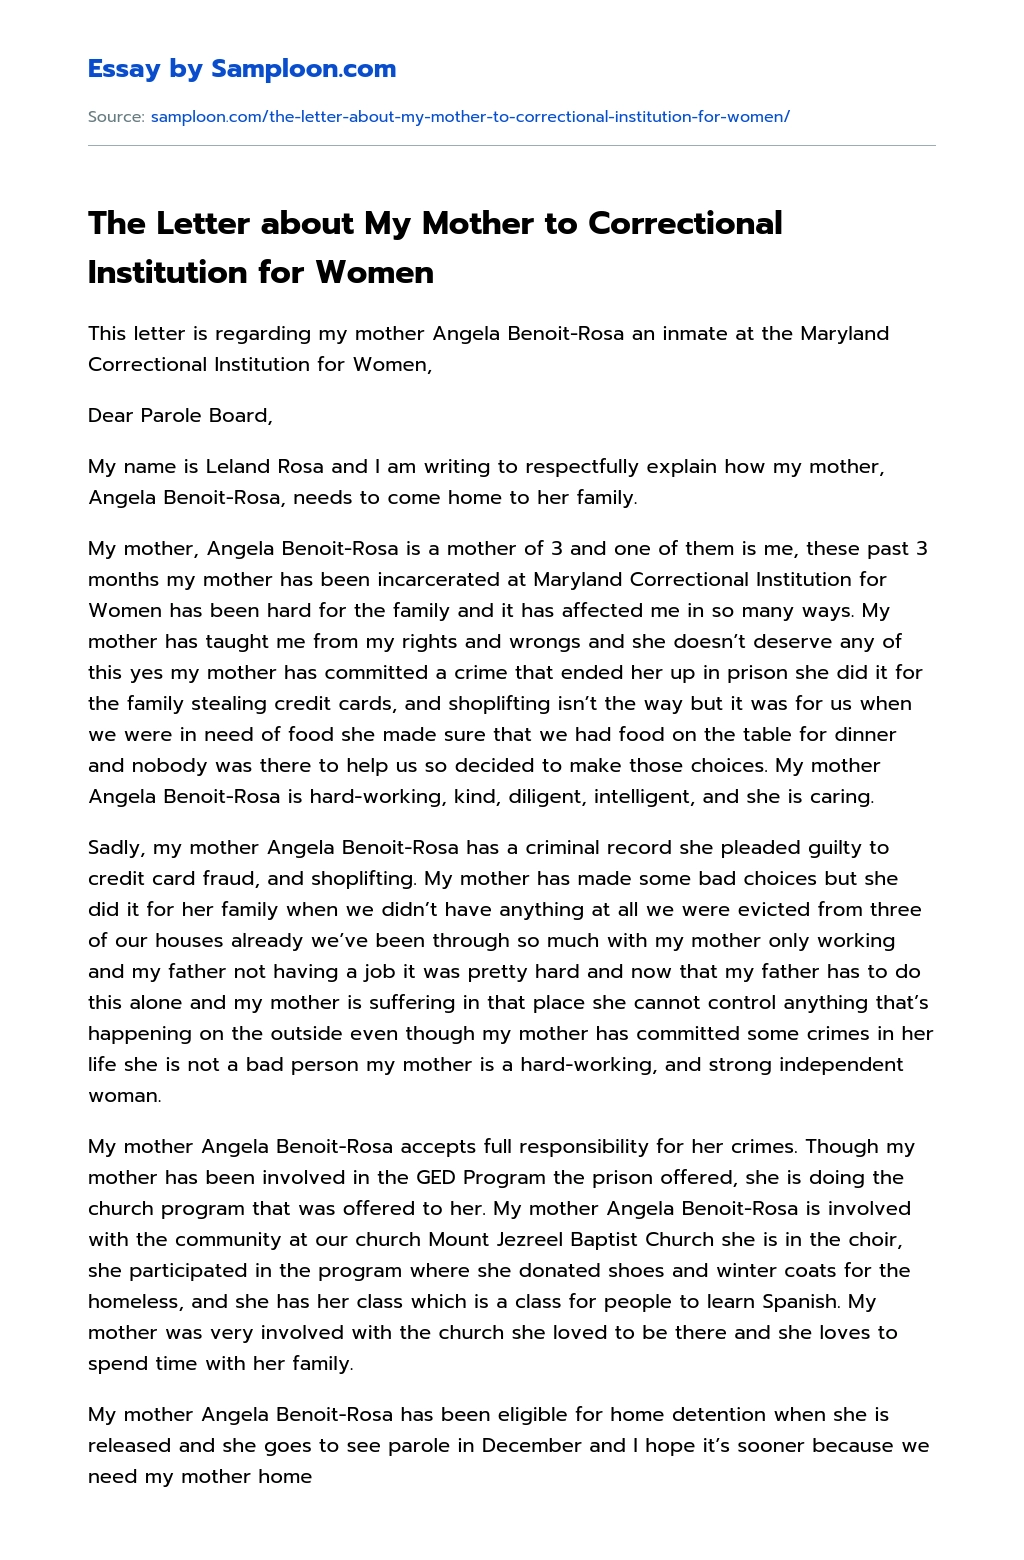 The Letter about My Mother to Correctional Institution for Women essay